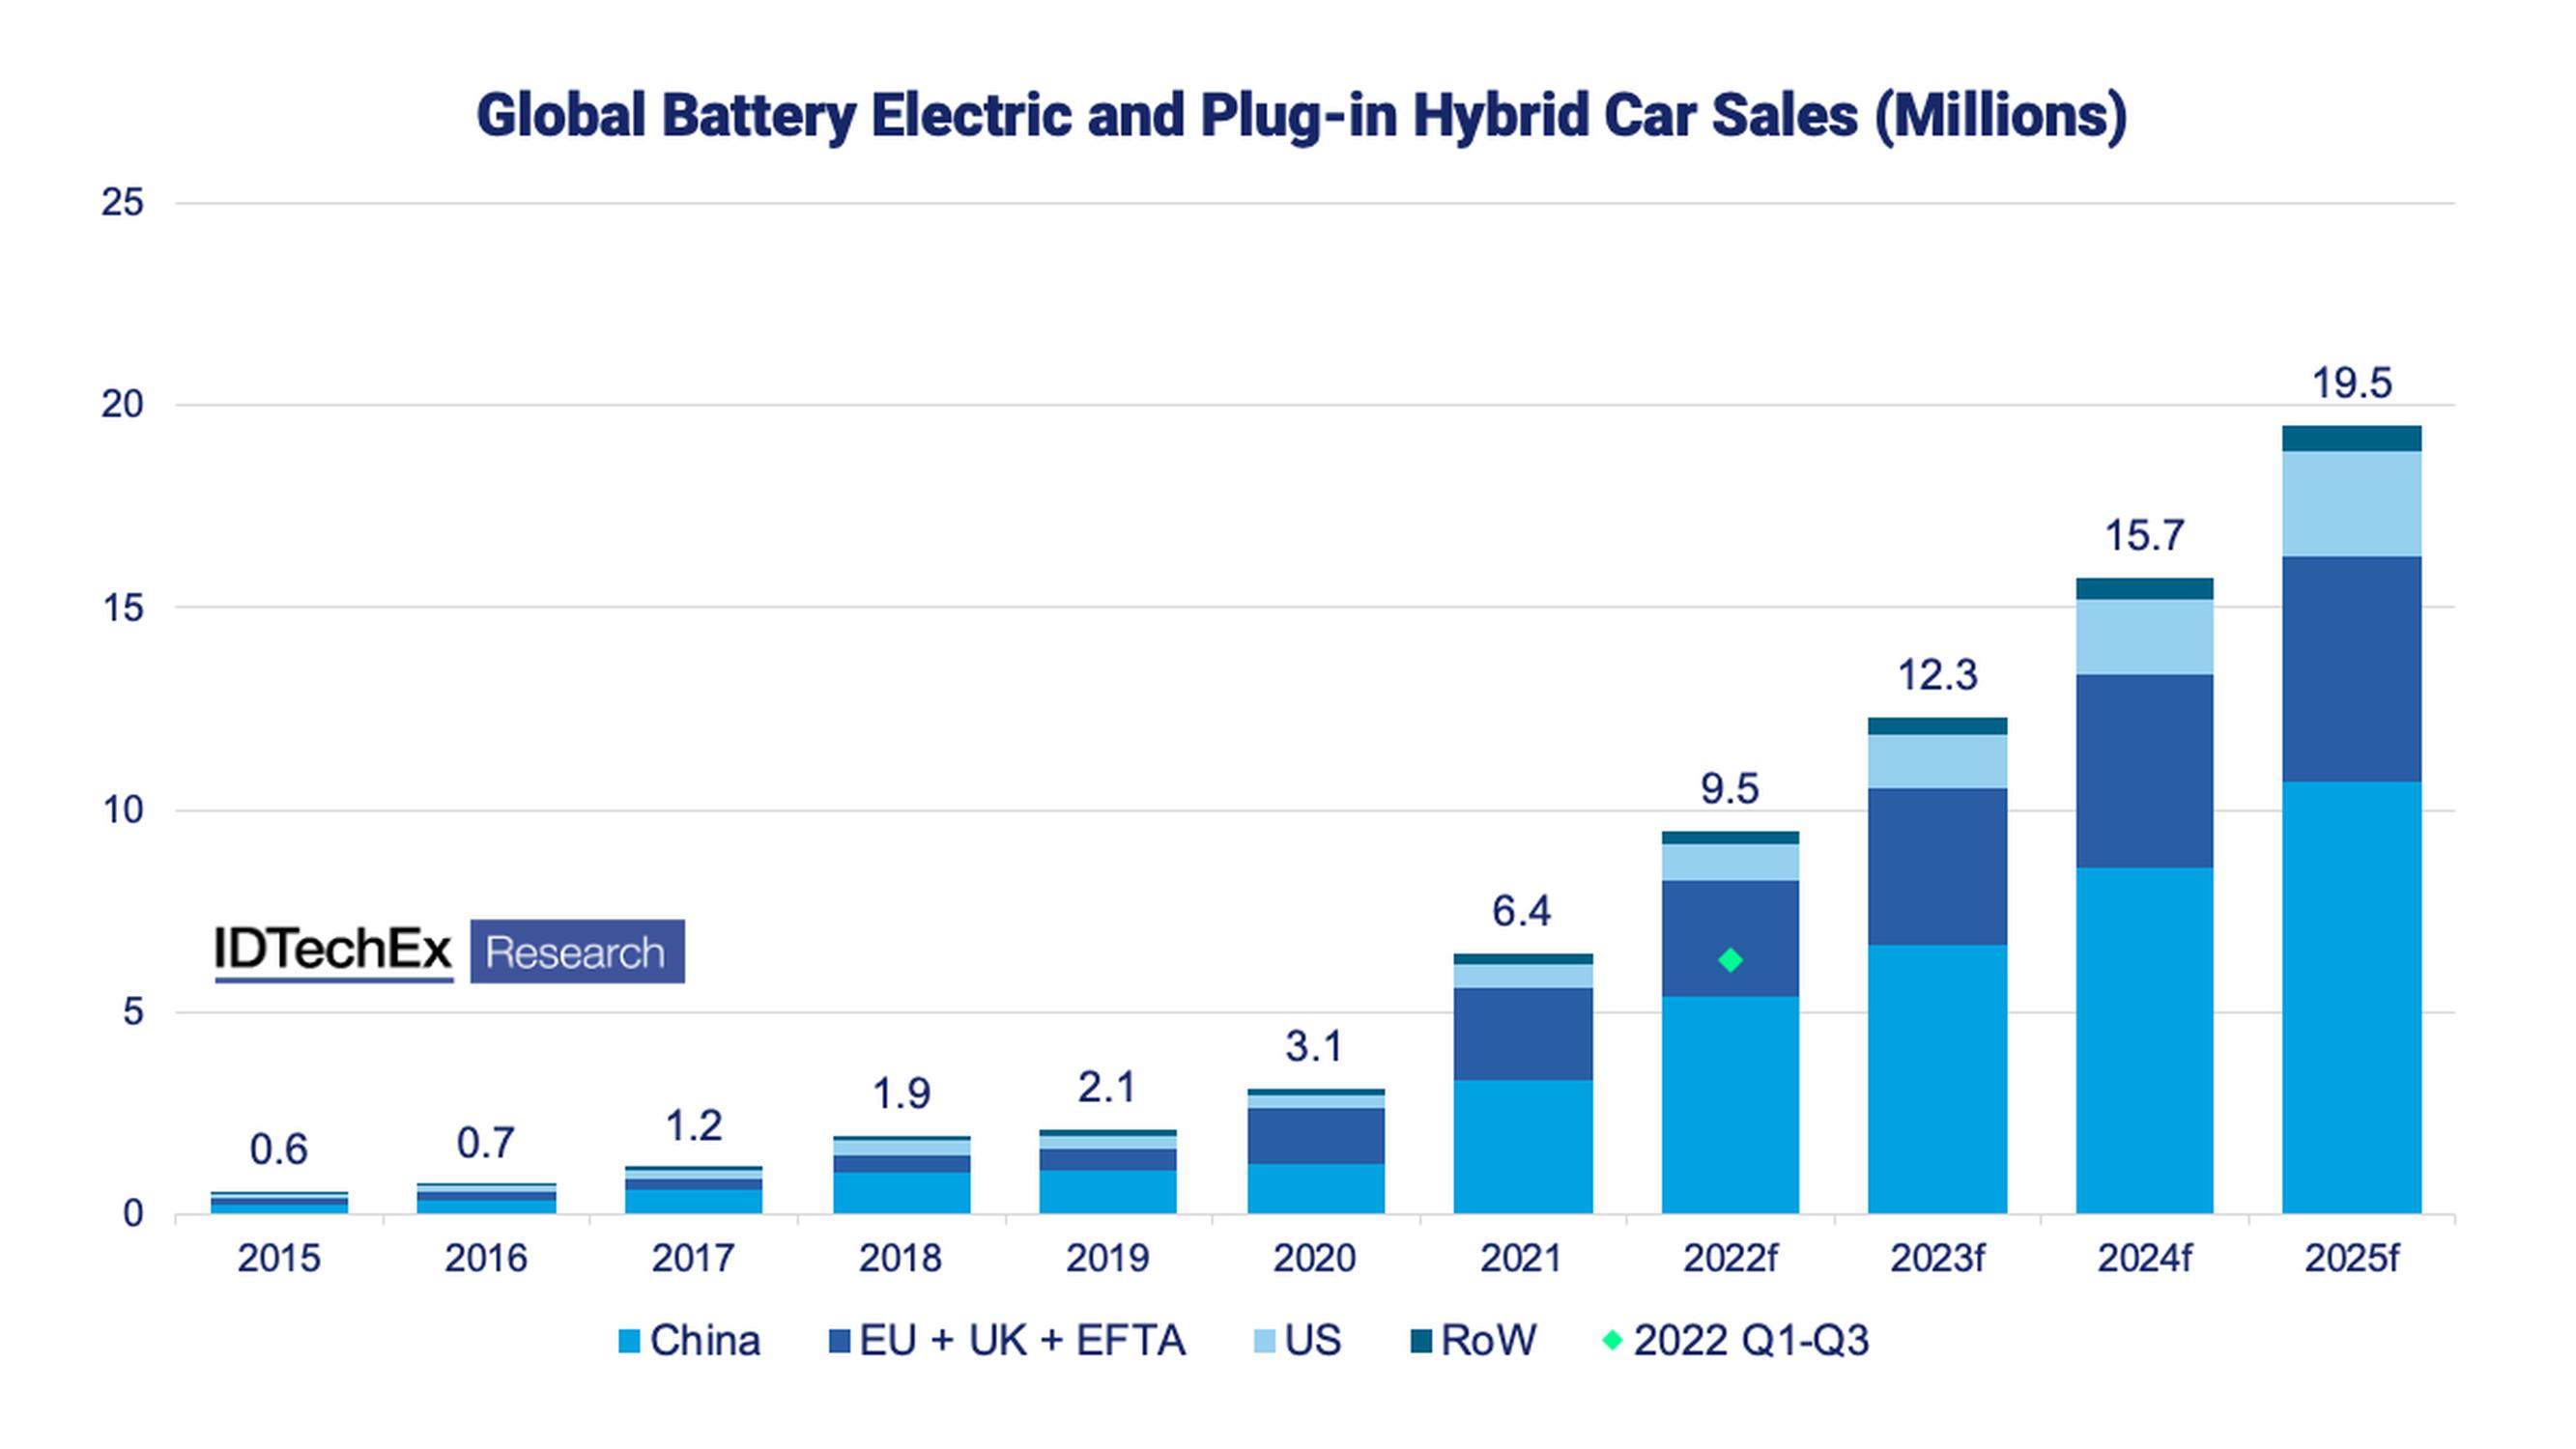 Global battery electric and plug-in hybrid car sales (millions). Source: IDTechEx